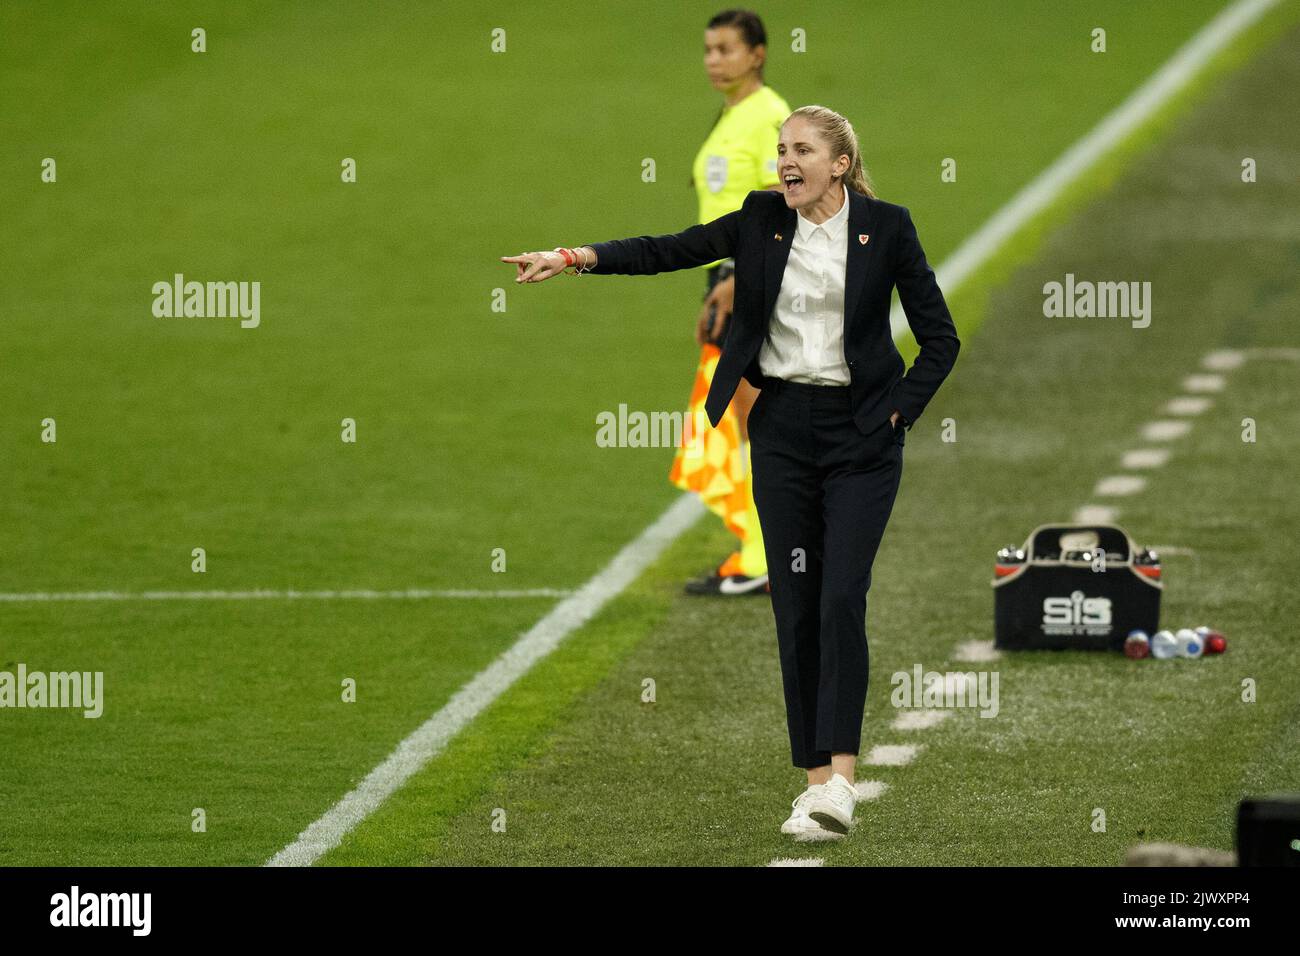 Cardiff, UK. 6th Sep, 2022. Wales manager Gemma Grainger gestures during the Wales v Slovenia Women's World Cup Qualification match. Credit: Gruffydd Thomas/Alamy Live News Stock Photo